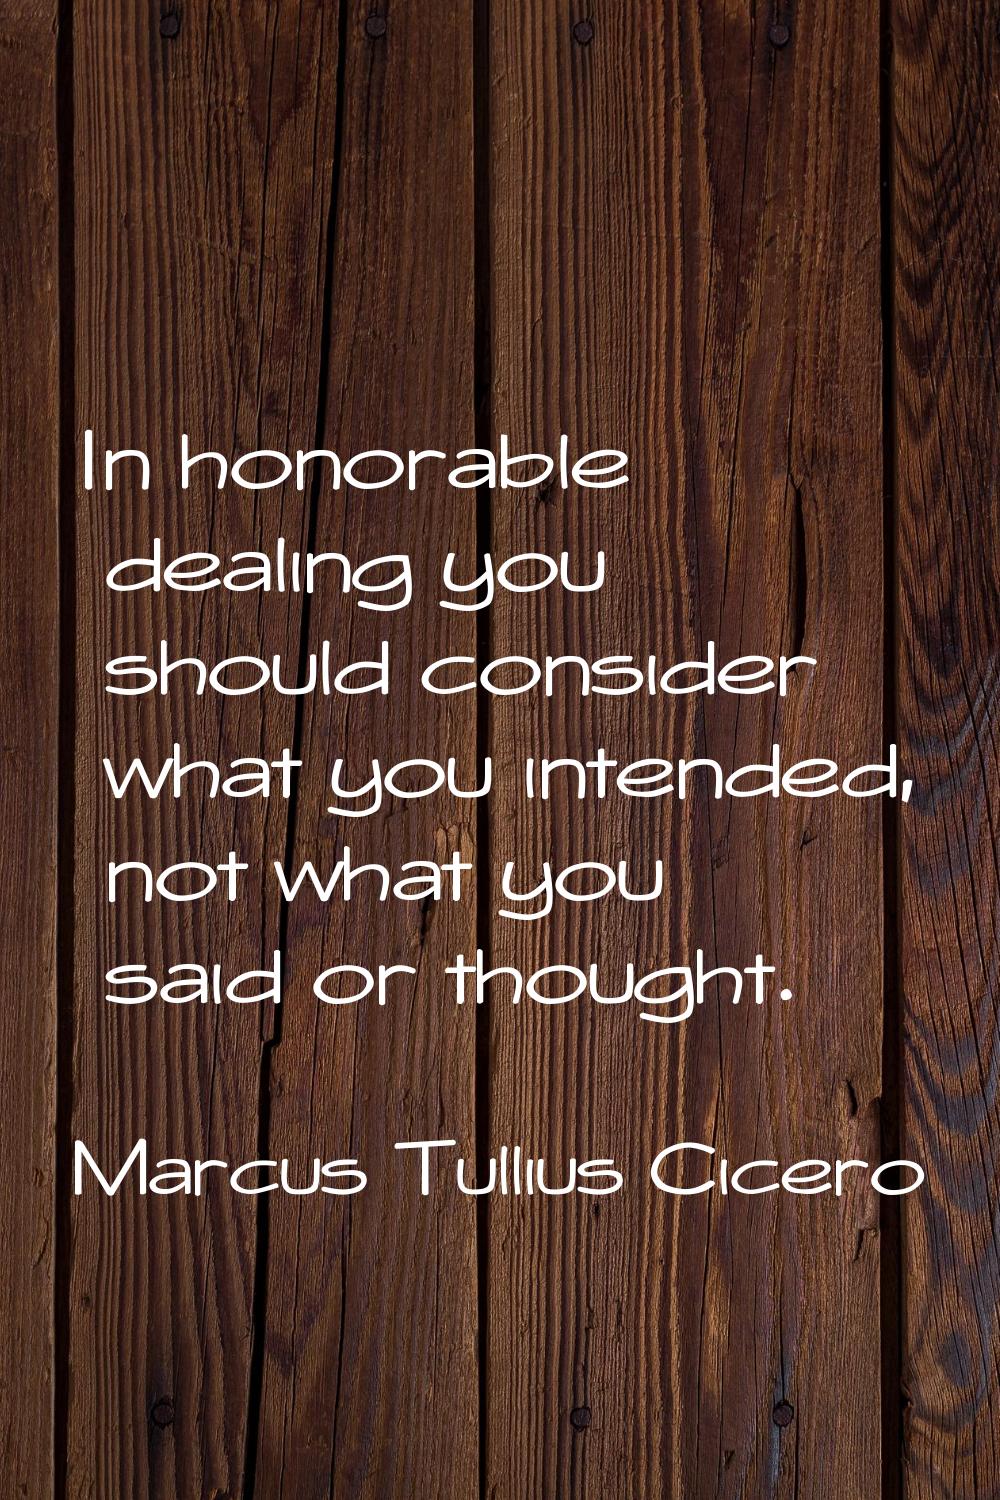 In honorable dealing you should consider what you intended, not what you said or thought.